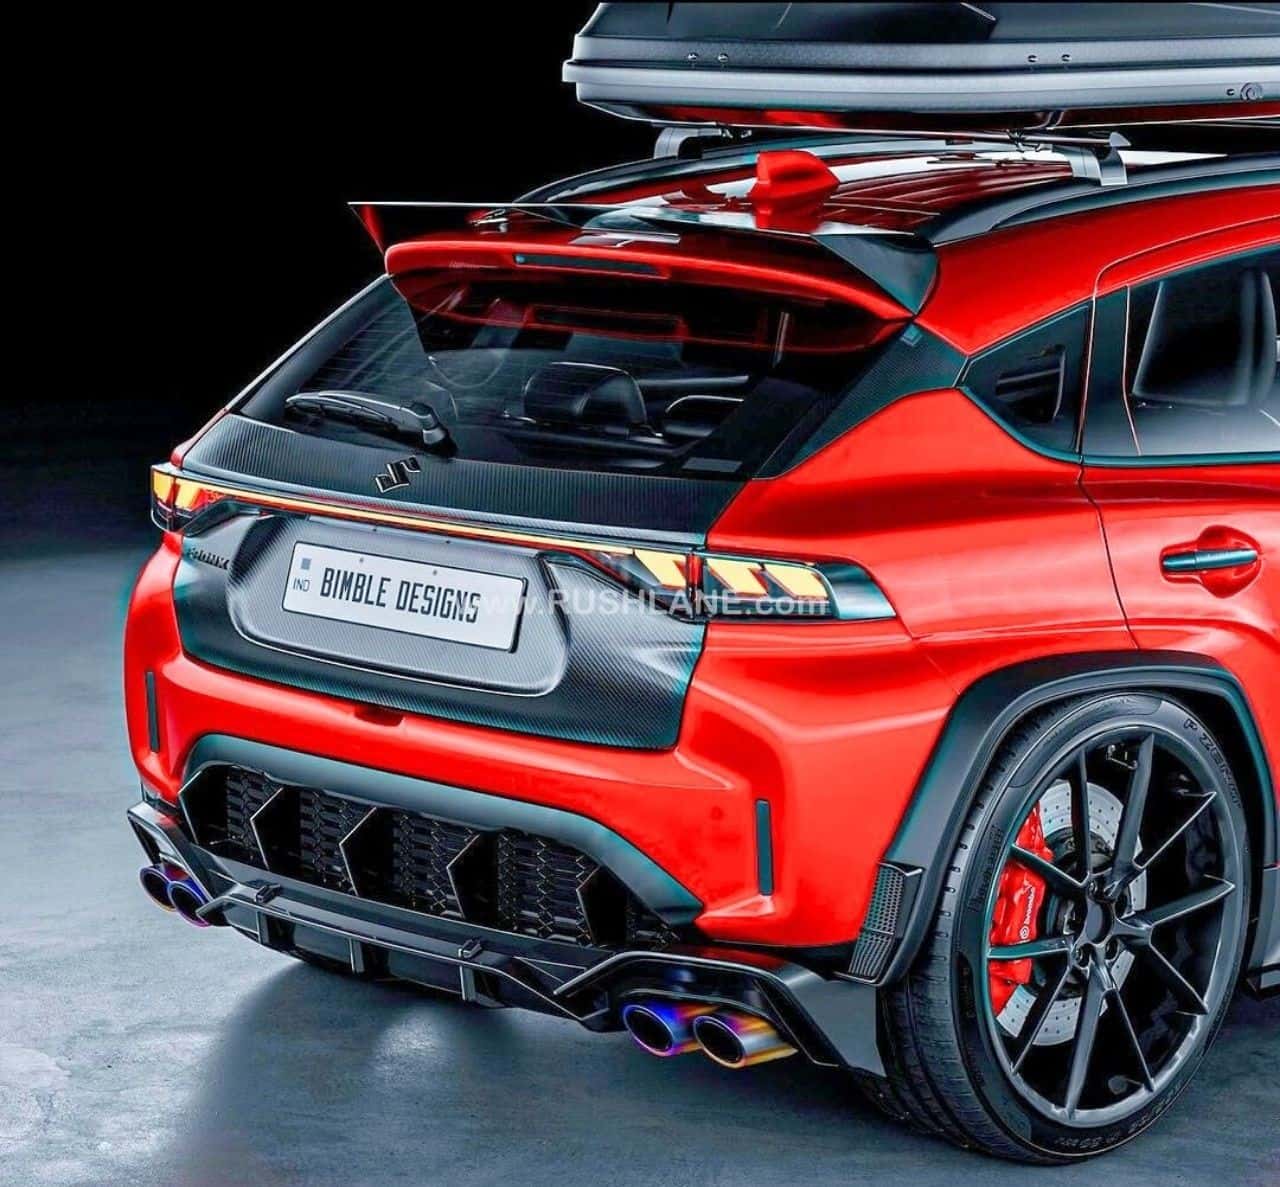 Fronx RS Render revised rear